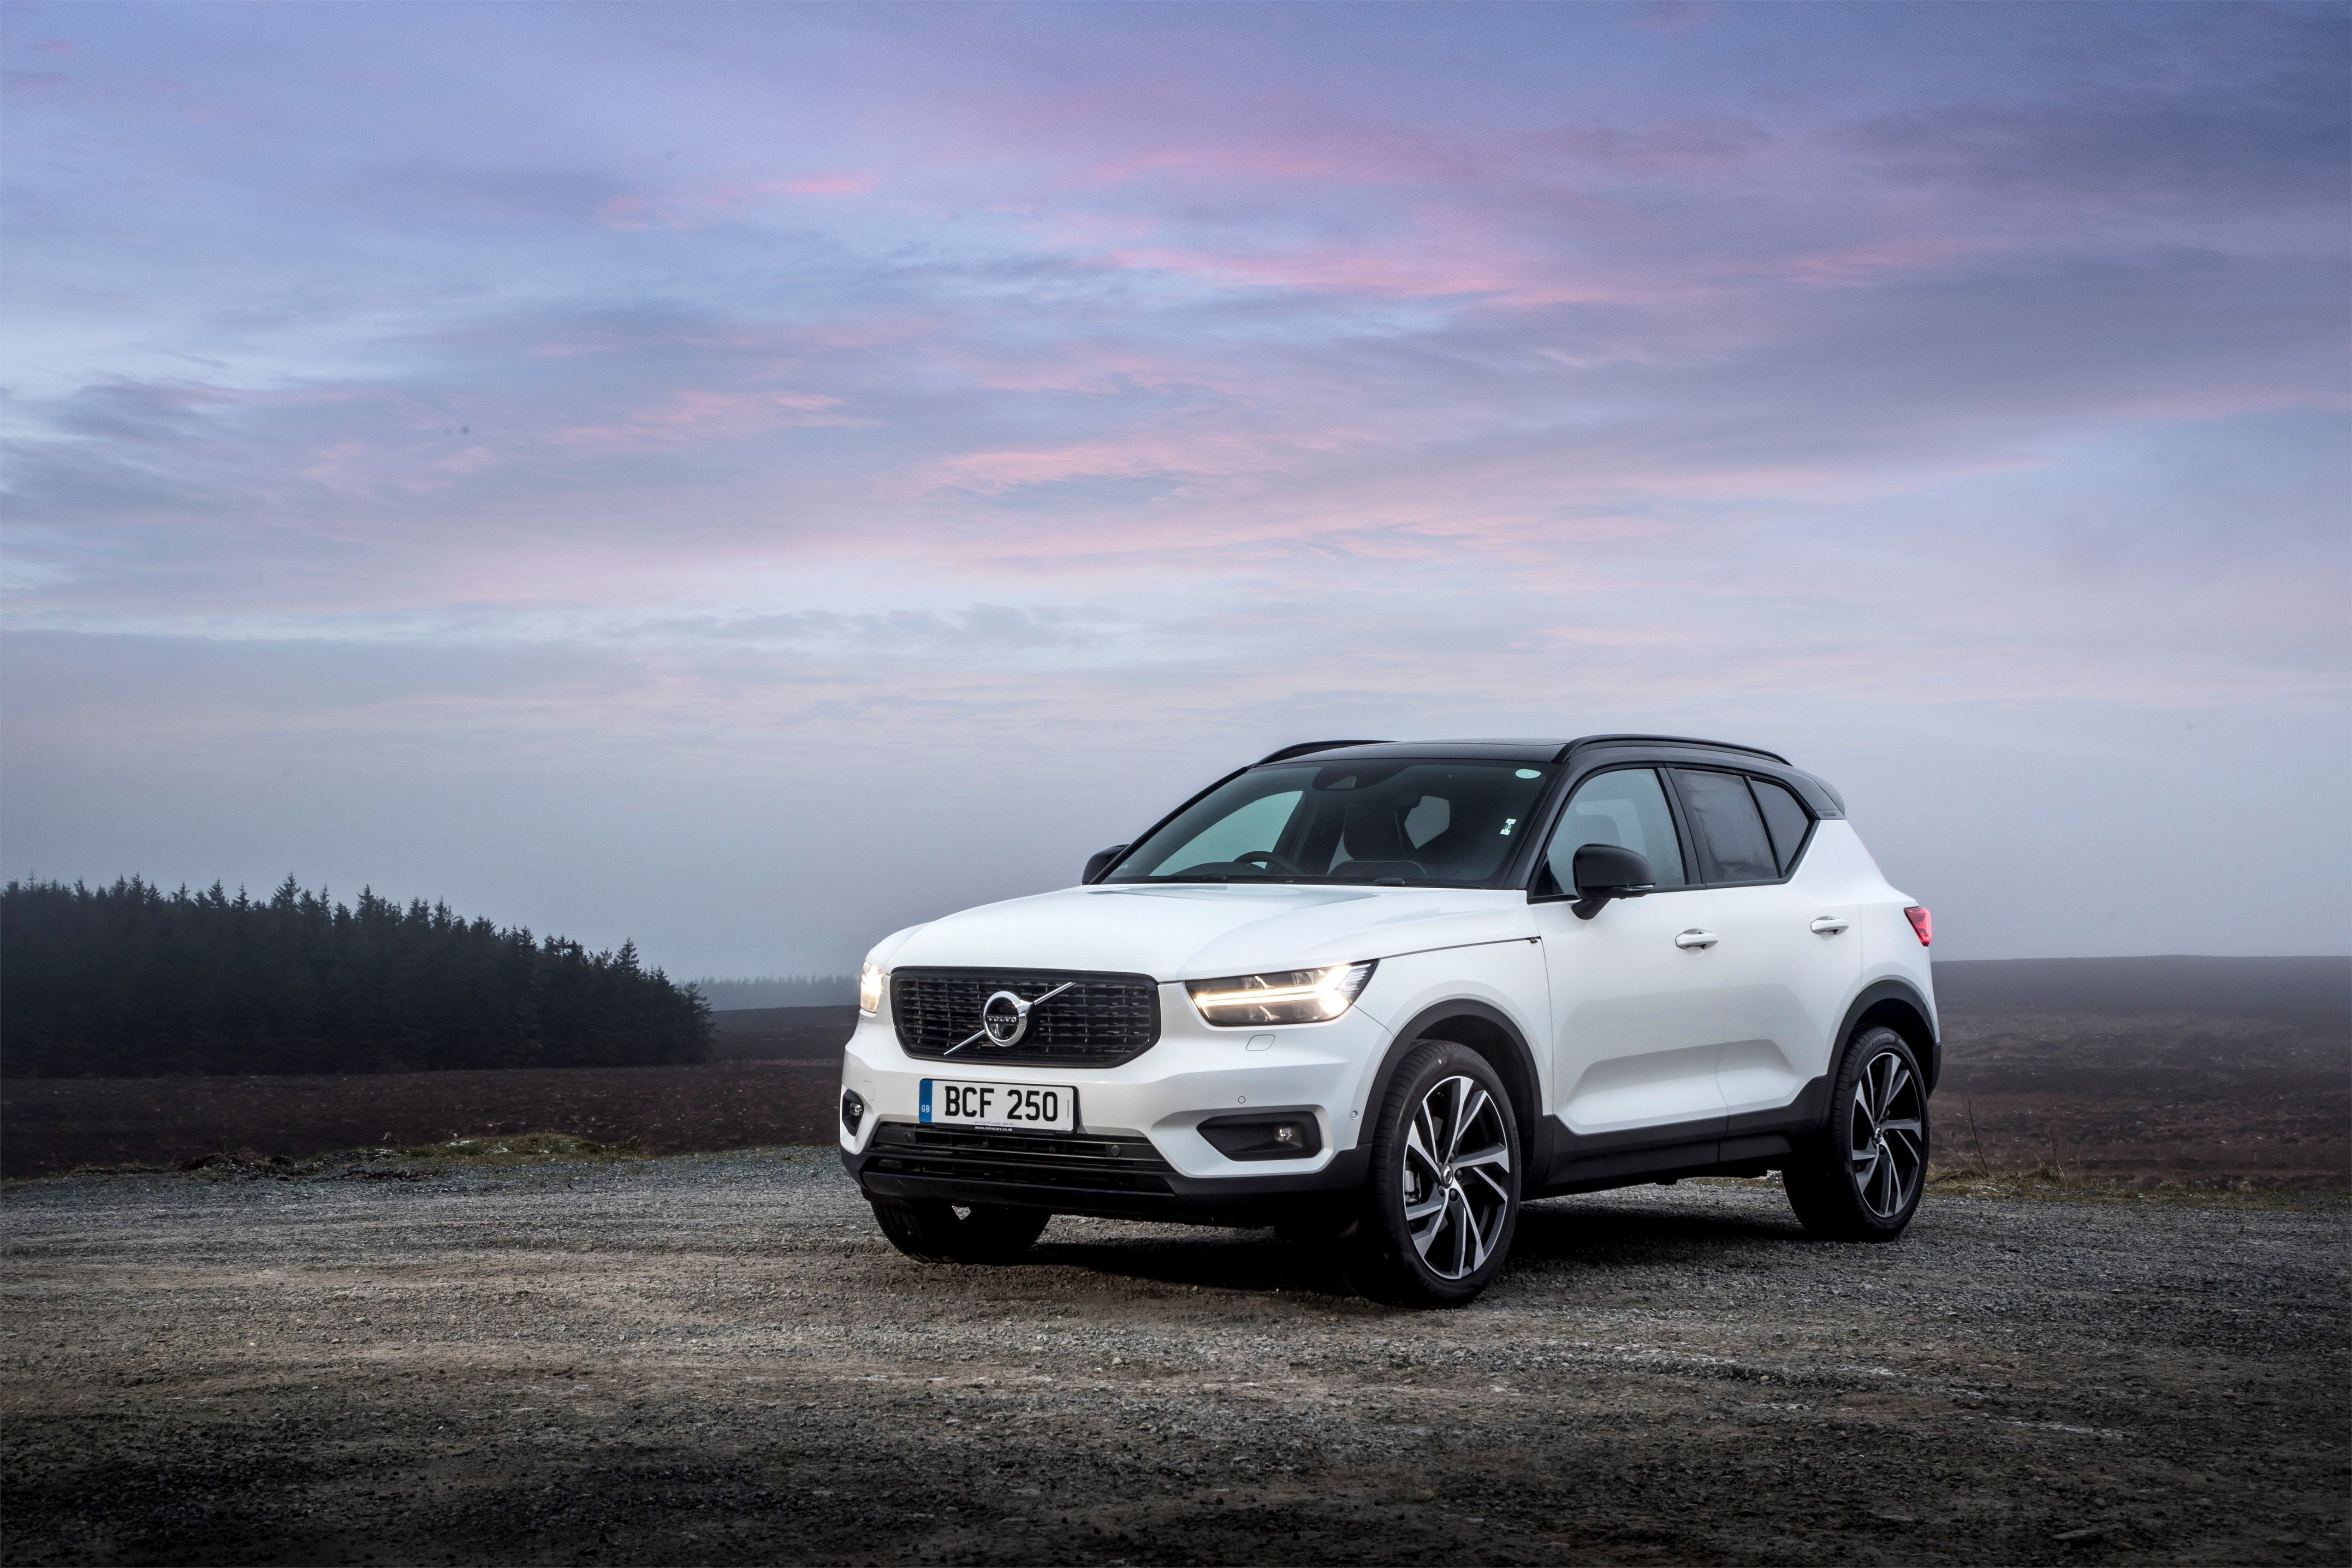 XC40 wins 'Family SUV of the Year' What Car? Award for the third time